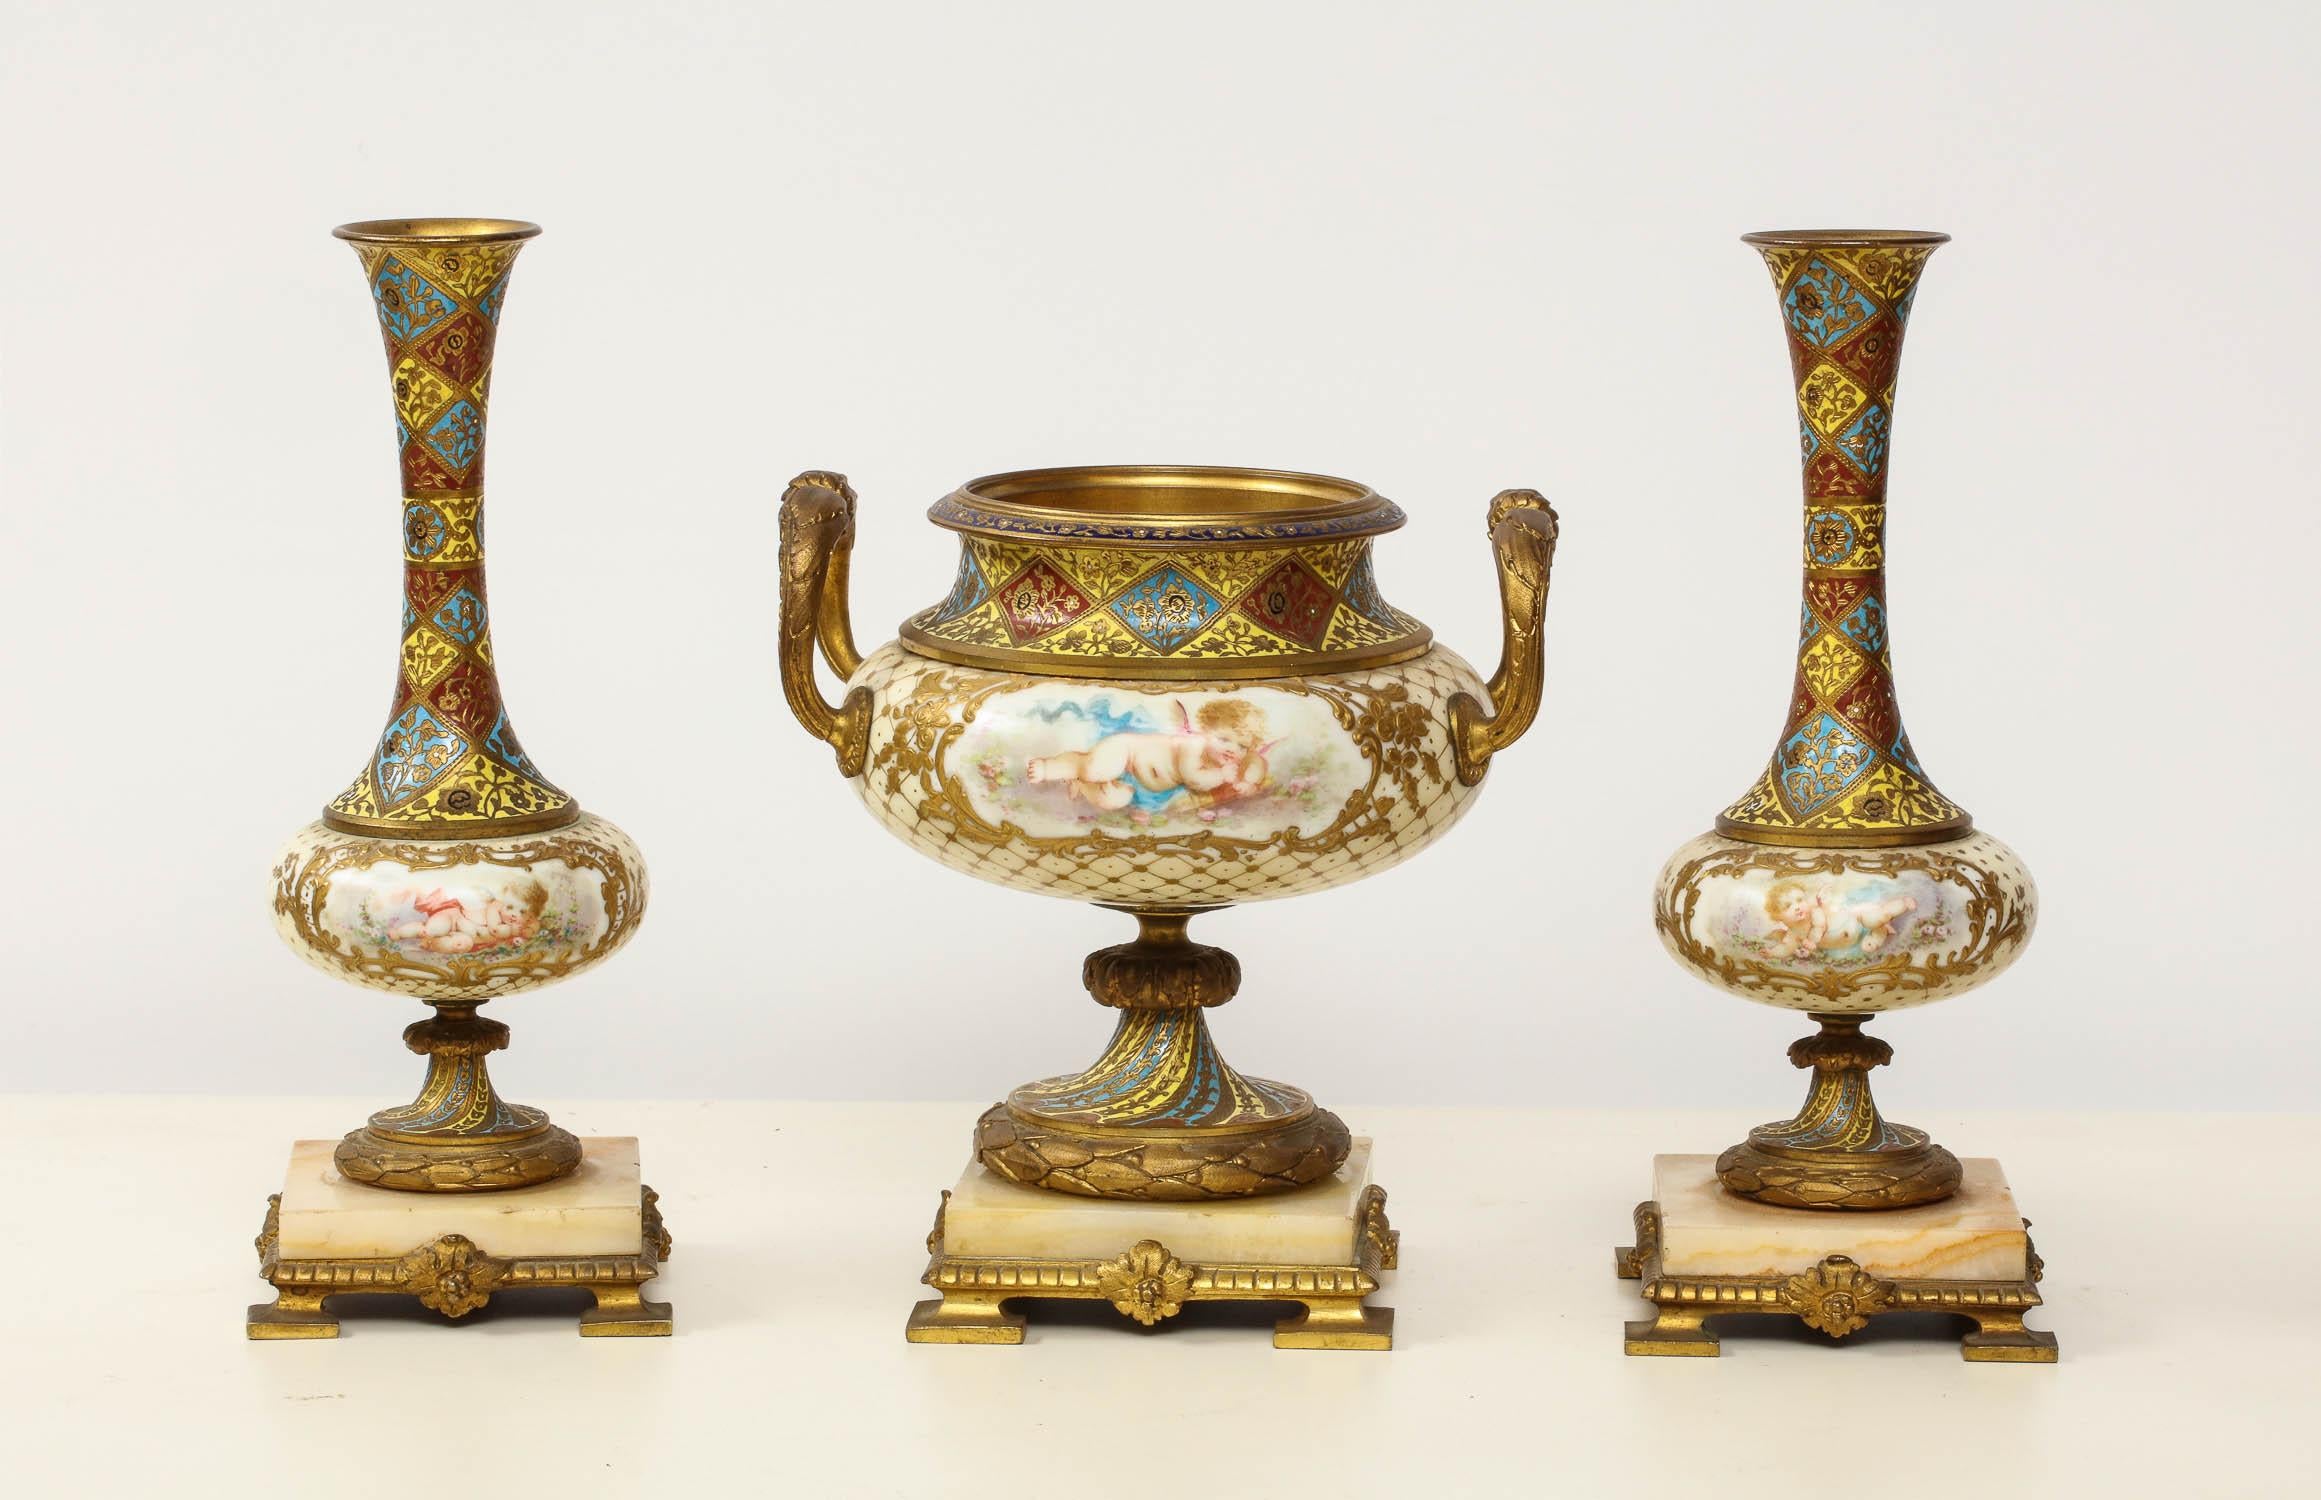 French ormolu-mounted Sevres style porcelain, Champlevé enamel, and onyx garniture, comprising of a pair of vases and centerpiece,

circa, 1880

Nice quality throughout. Good condition, ready to place.

Measures: Vases 8